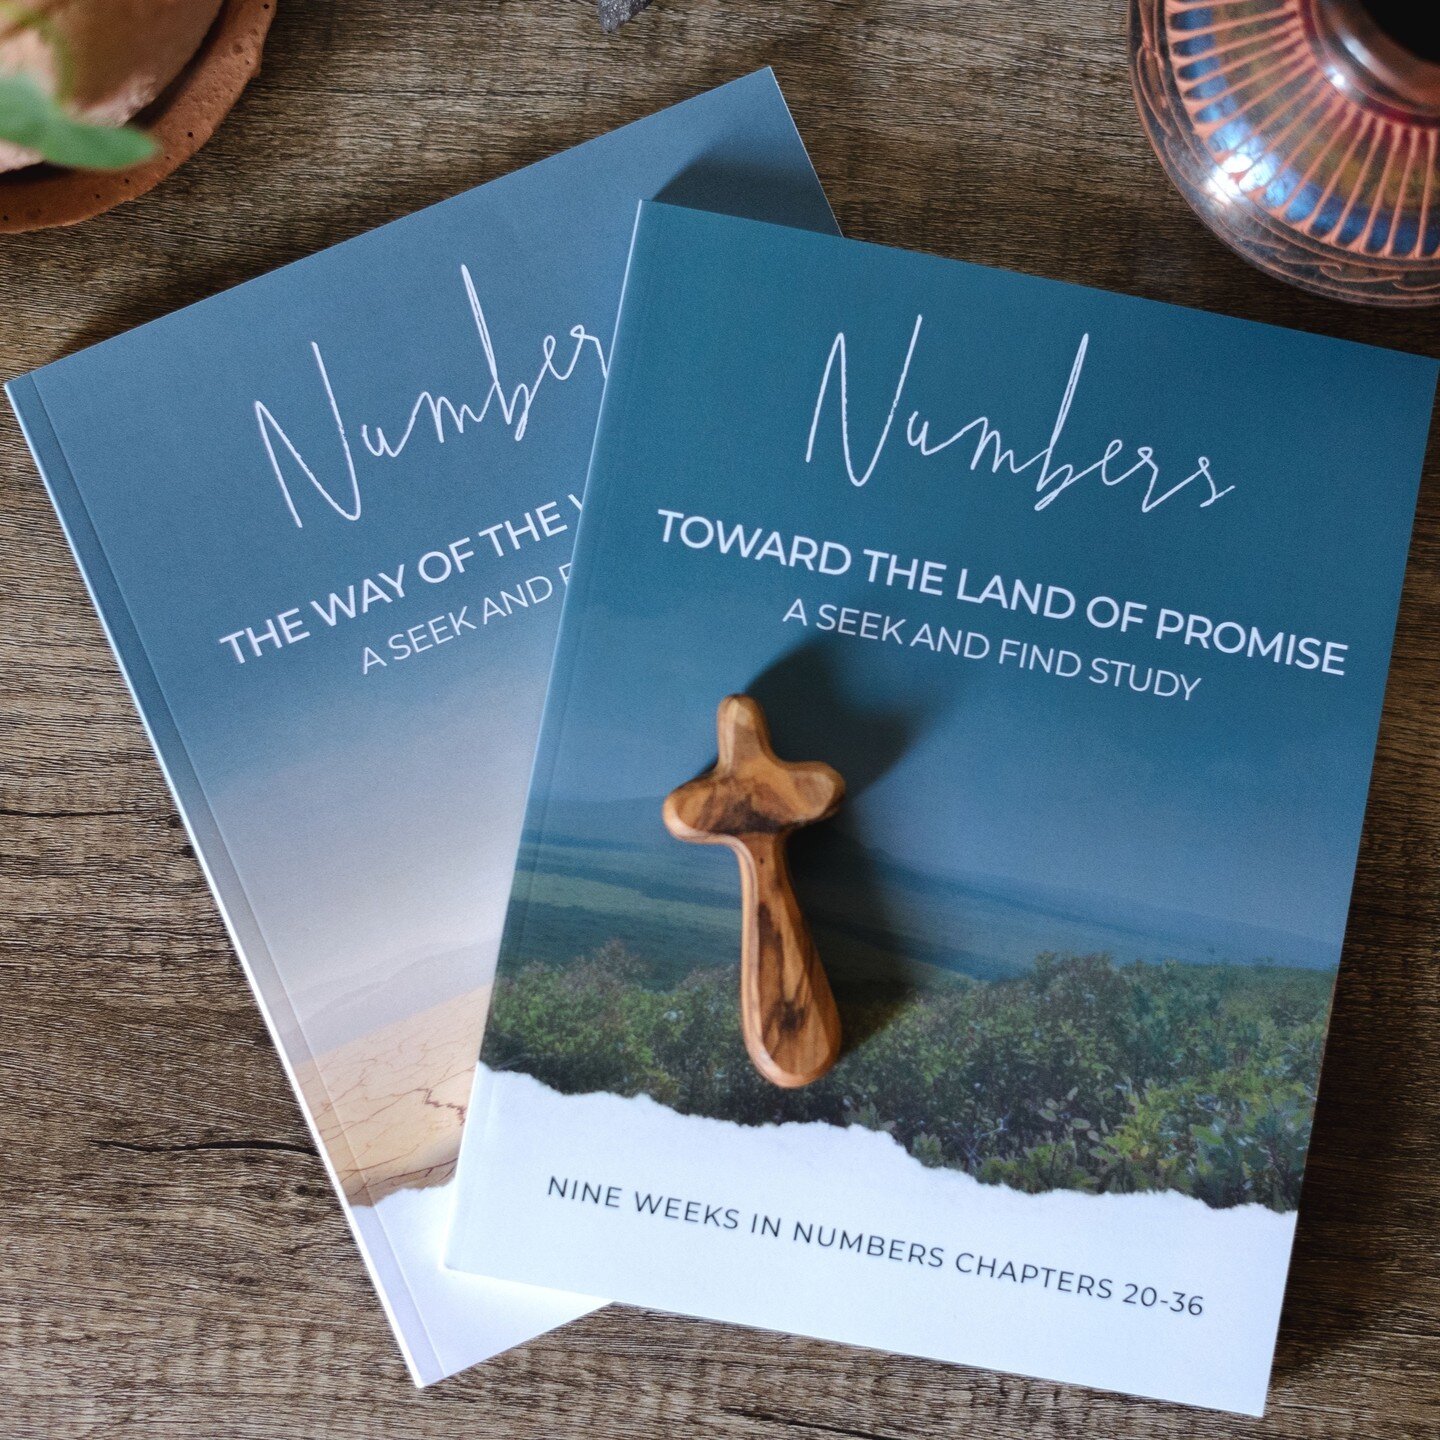 Our two part, in-depth study of the book of Numbers explores the journey of the Israelites through the wilderness and toward the land of God's promise.

Through their journey, the Israelites came to know the wilderness as a place of teaching, of test